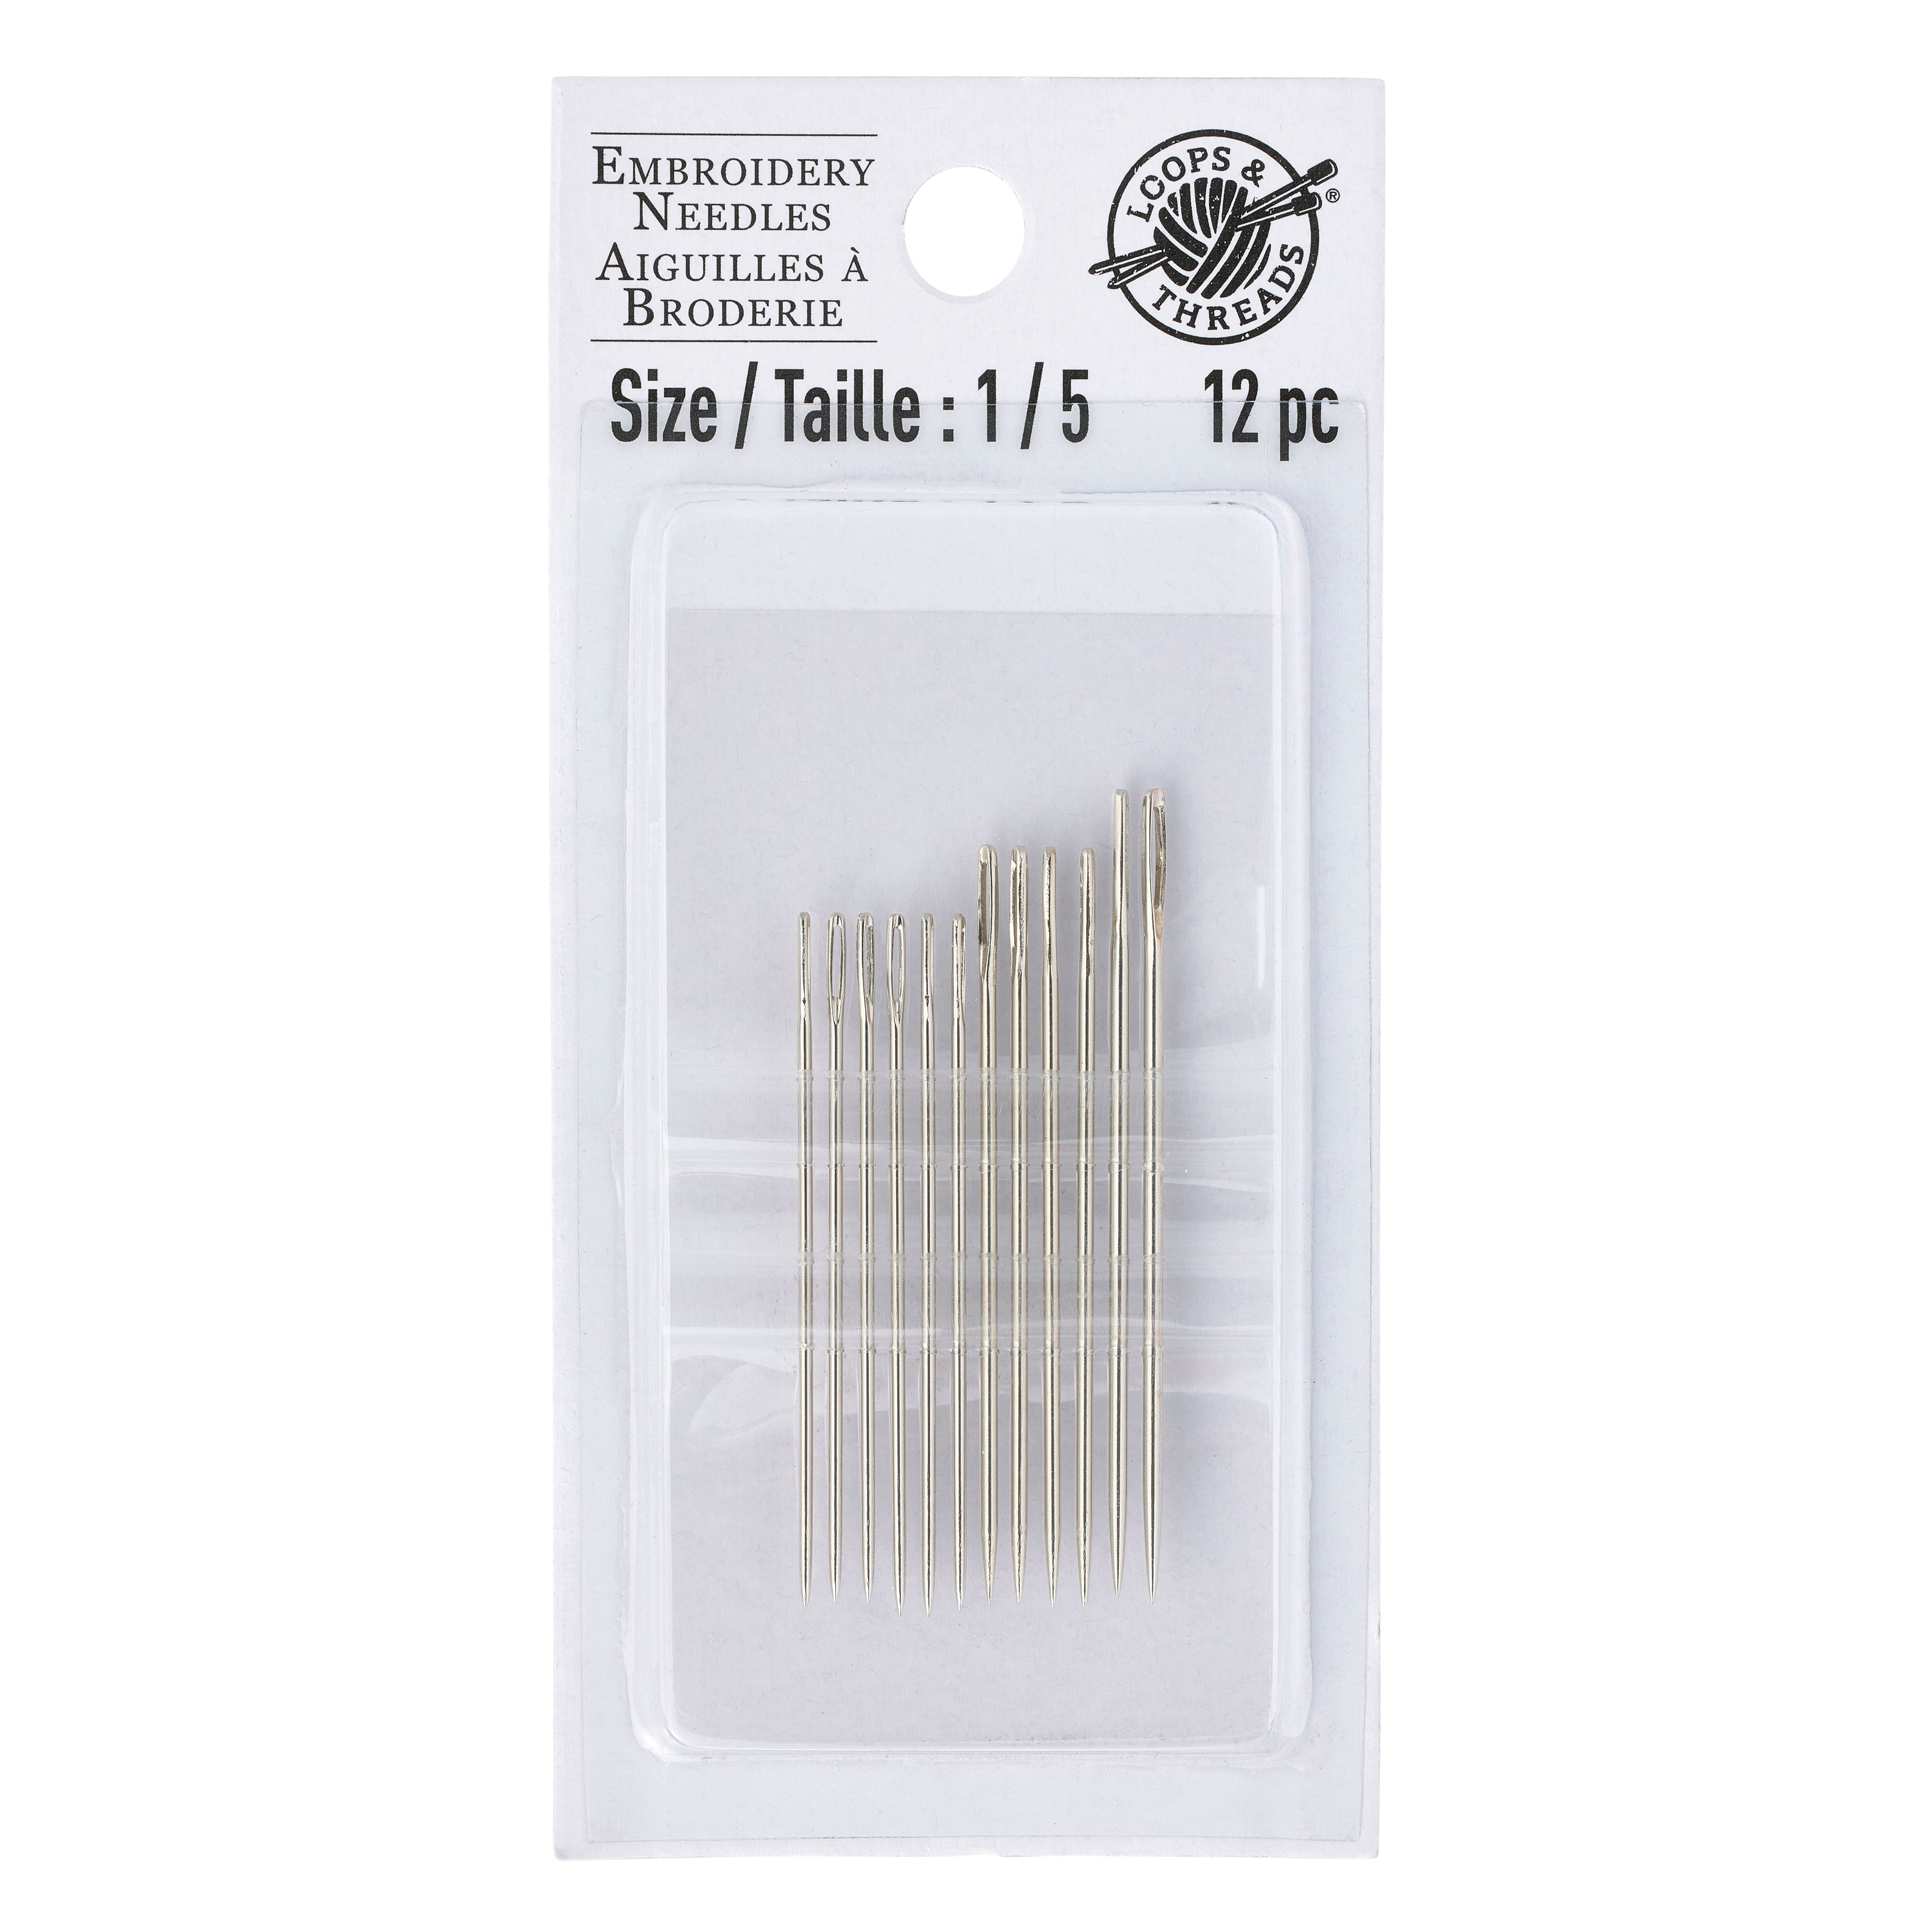 Loops & Threads Embroidery Needles, 1/5 | Michaels